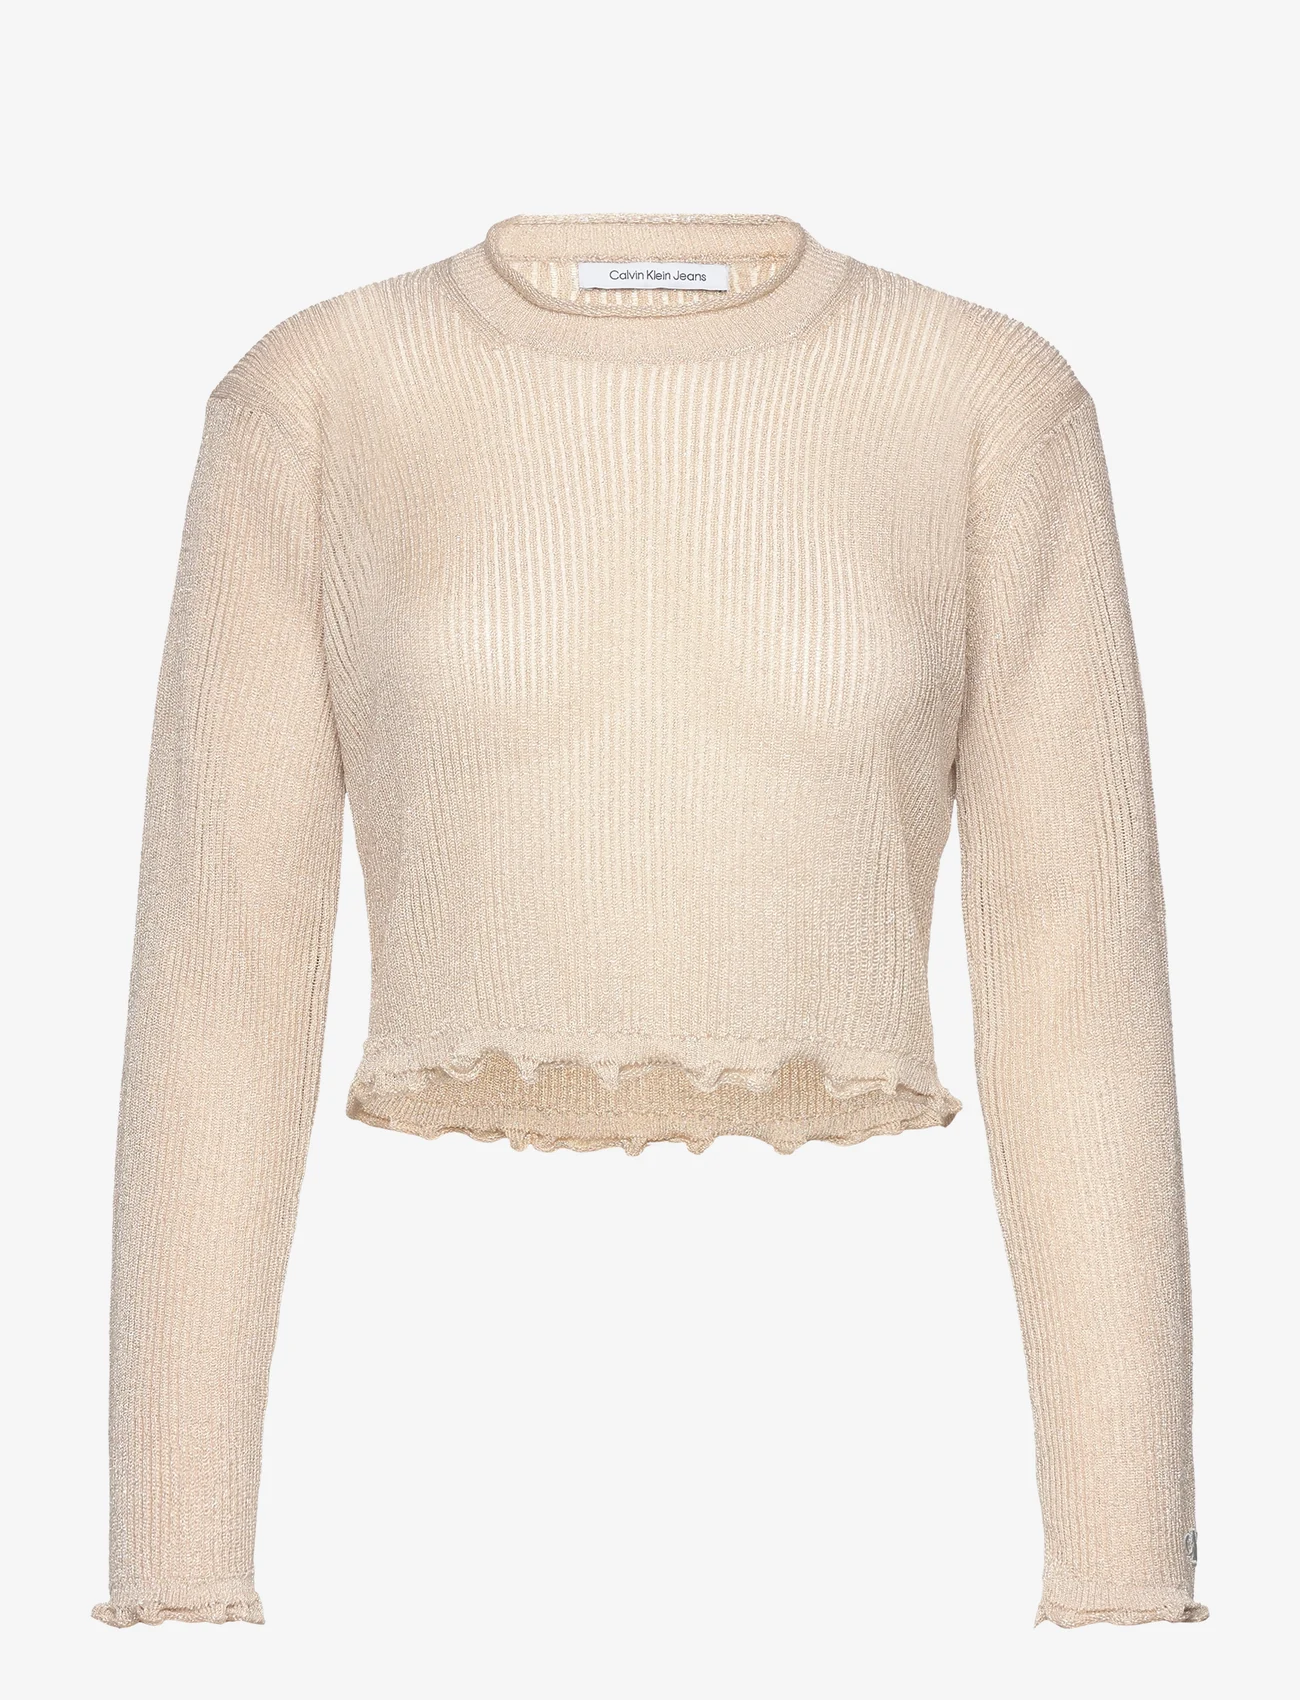 Calvin Klein Jeans - METALLIC SWEATER - pullover - frosted almond - 0